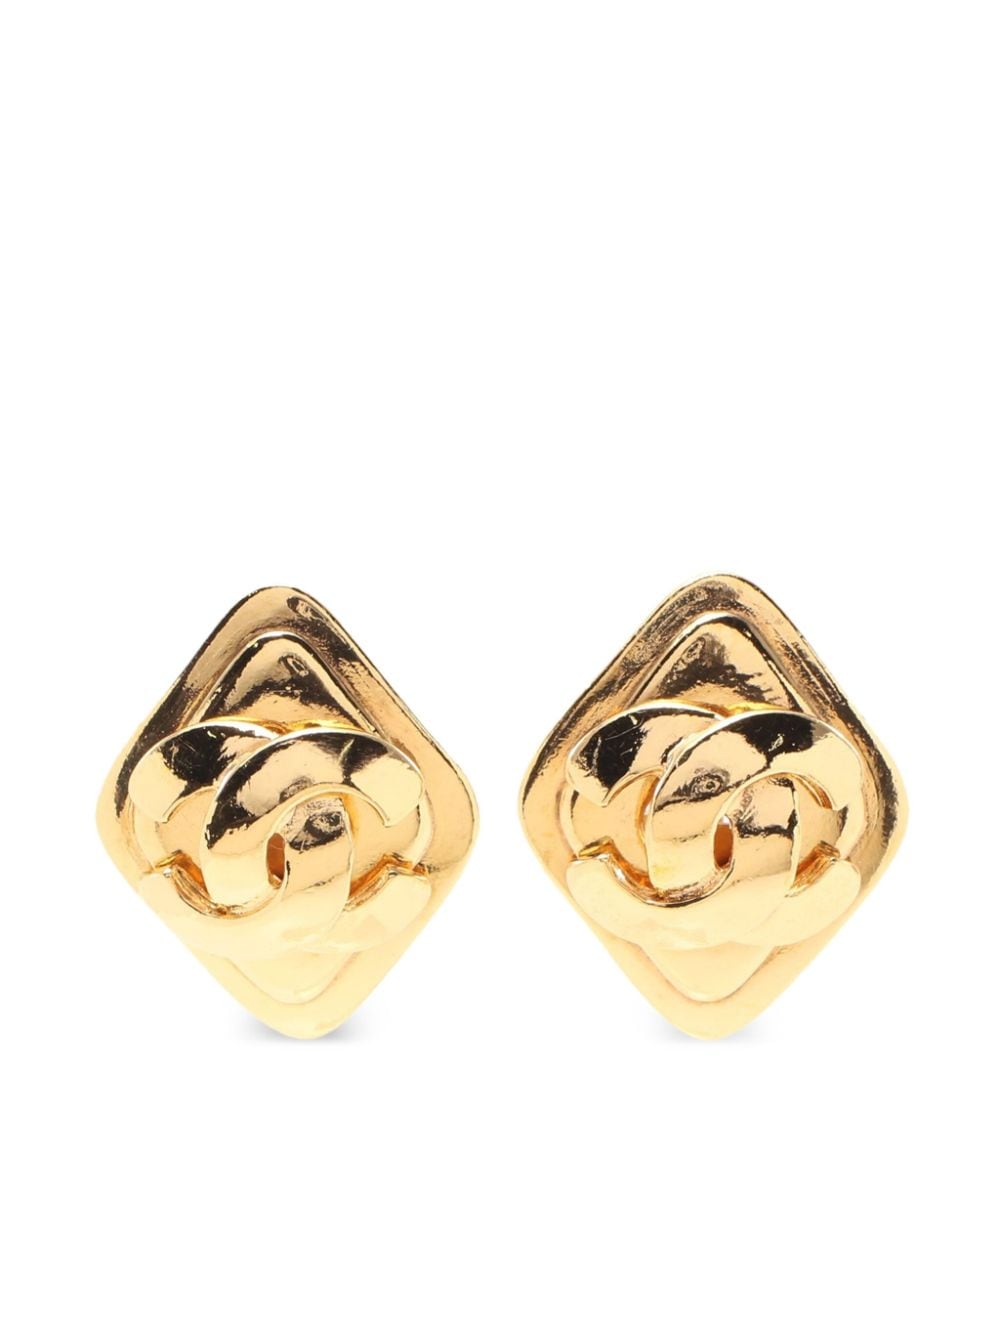 Pre-owned Chanel 1986-1988 Cc Clip-on Earrings In Gold